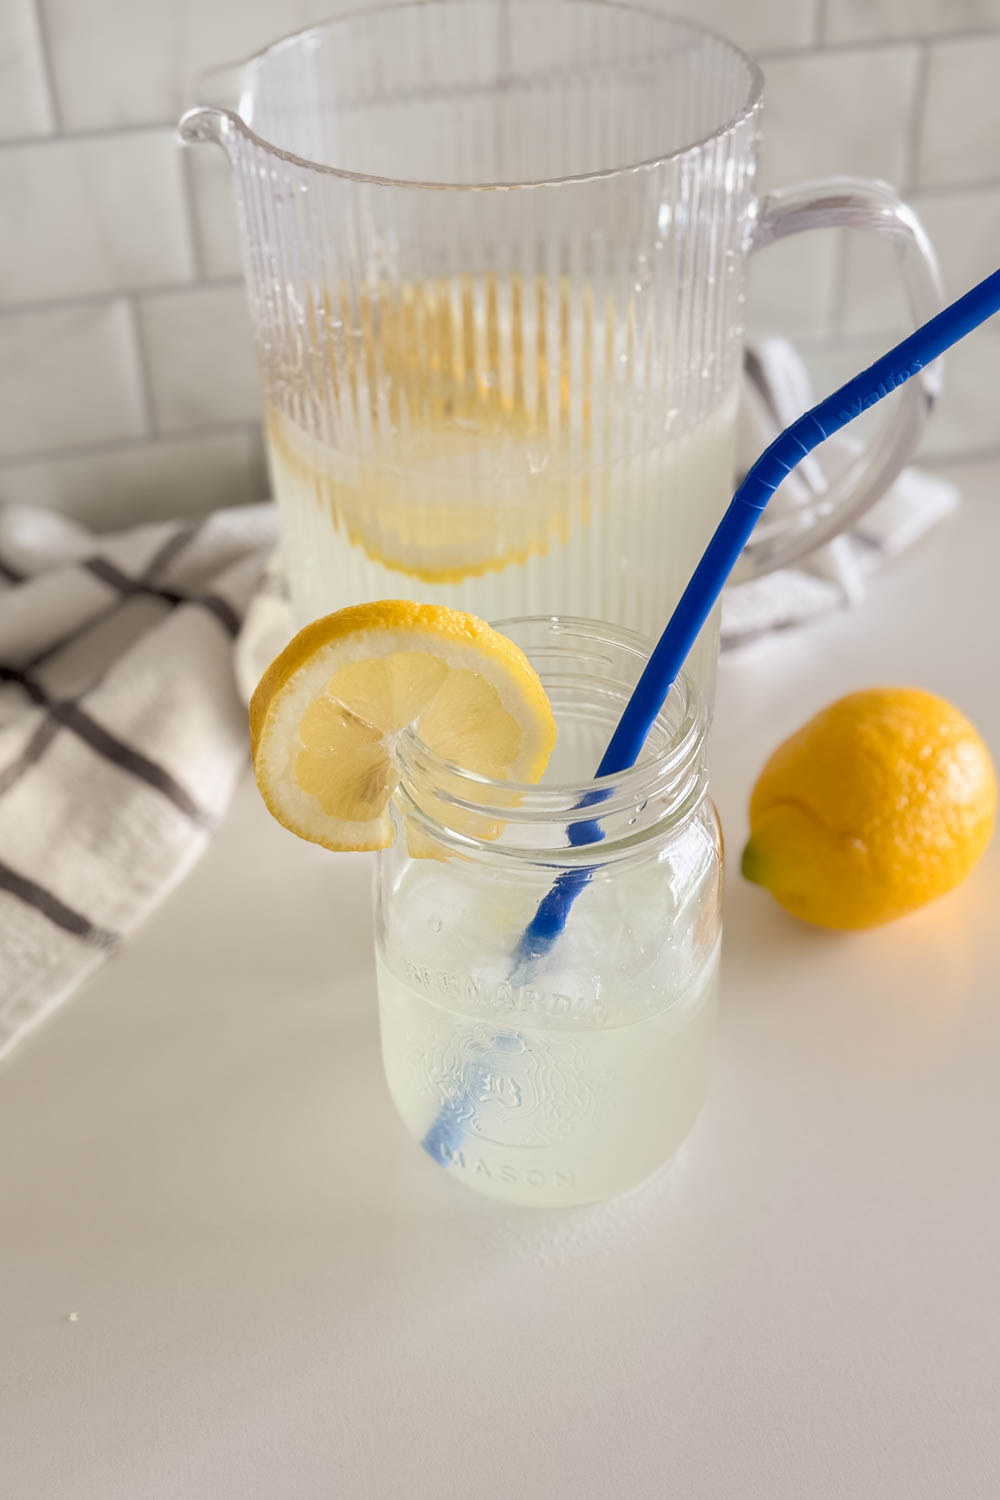 A glass of fresh homemade lemonade next to a full pitcher, with lemon slices and a full lemon